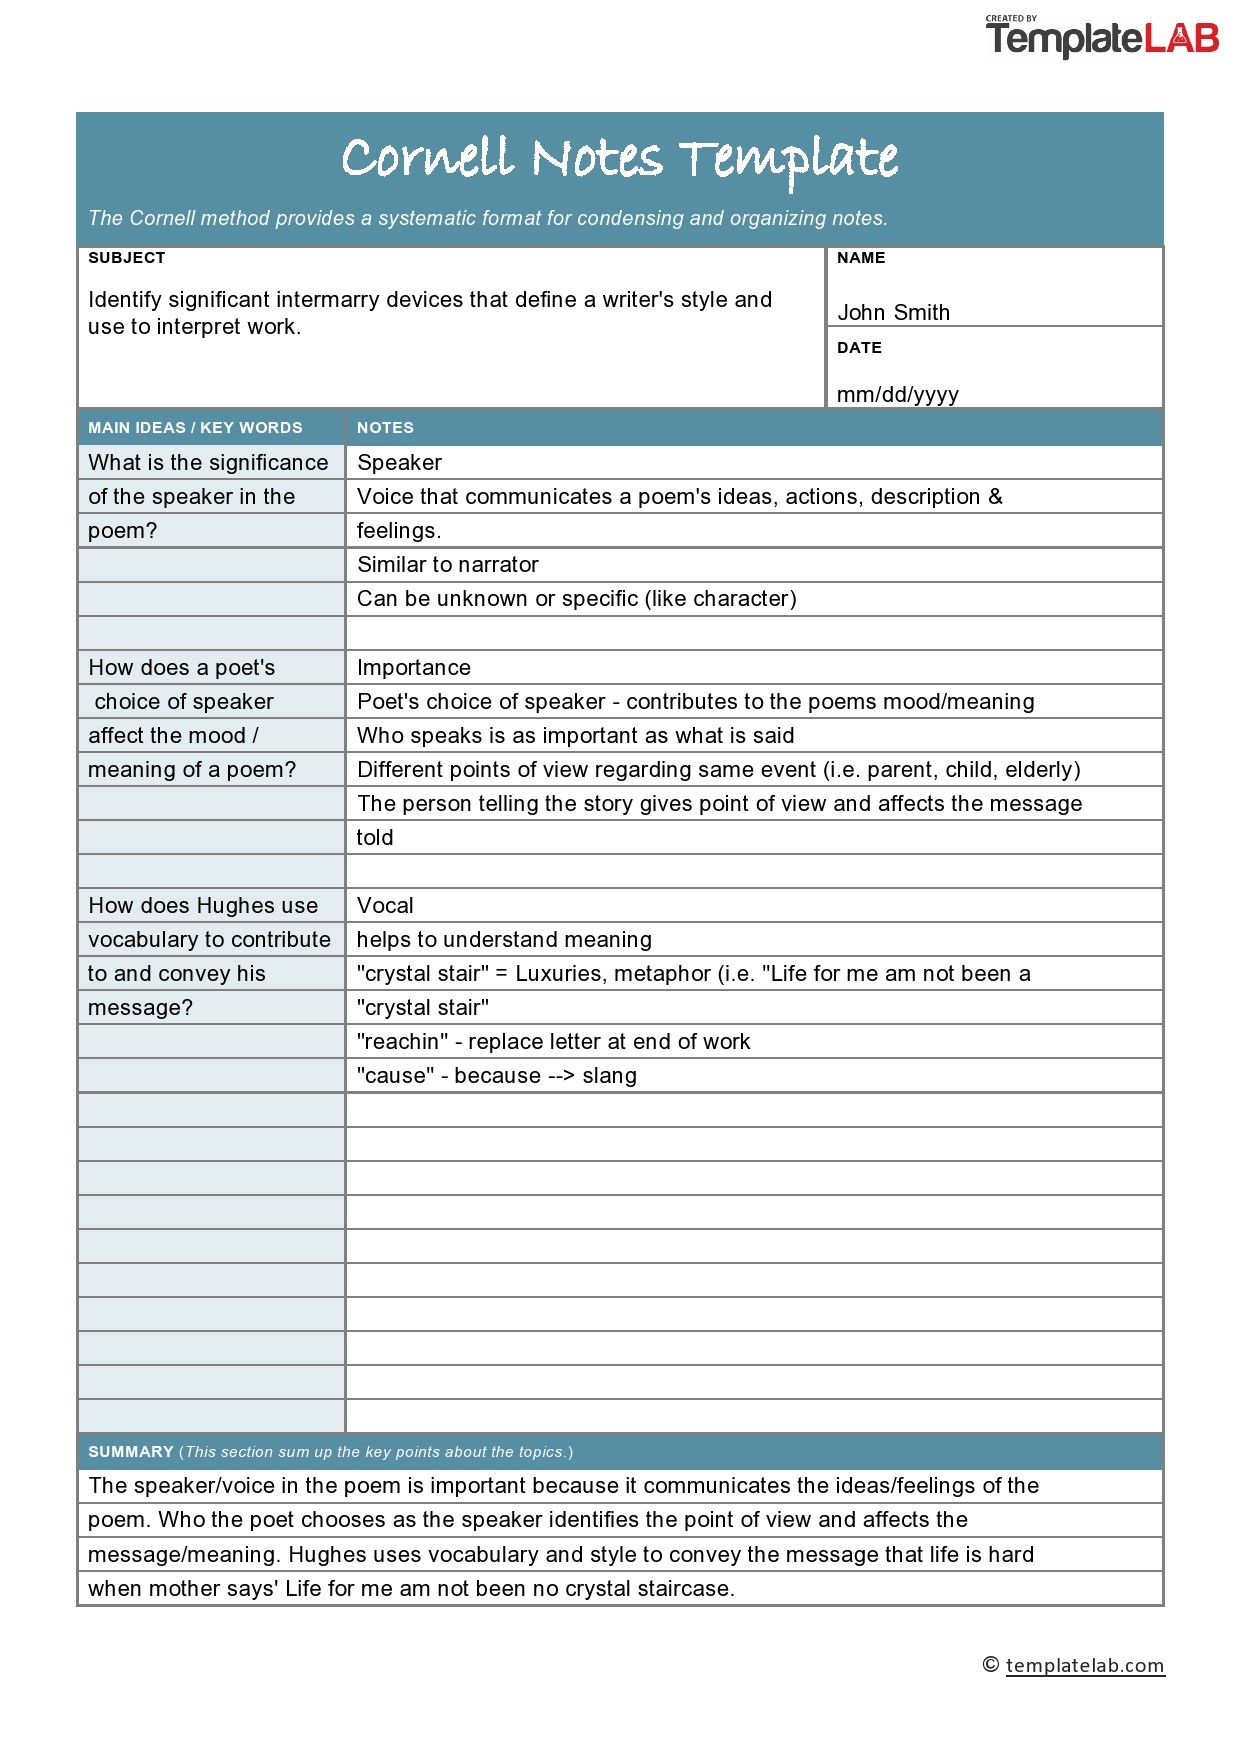 16 Printable Cornell Notes Templates [Word, Excel, PDF]